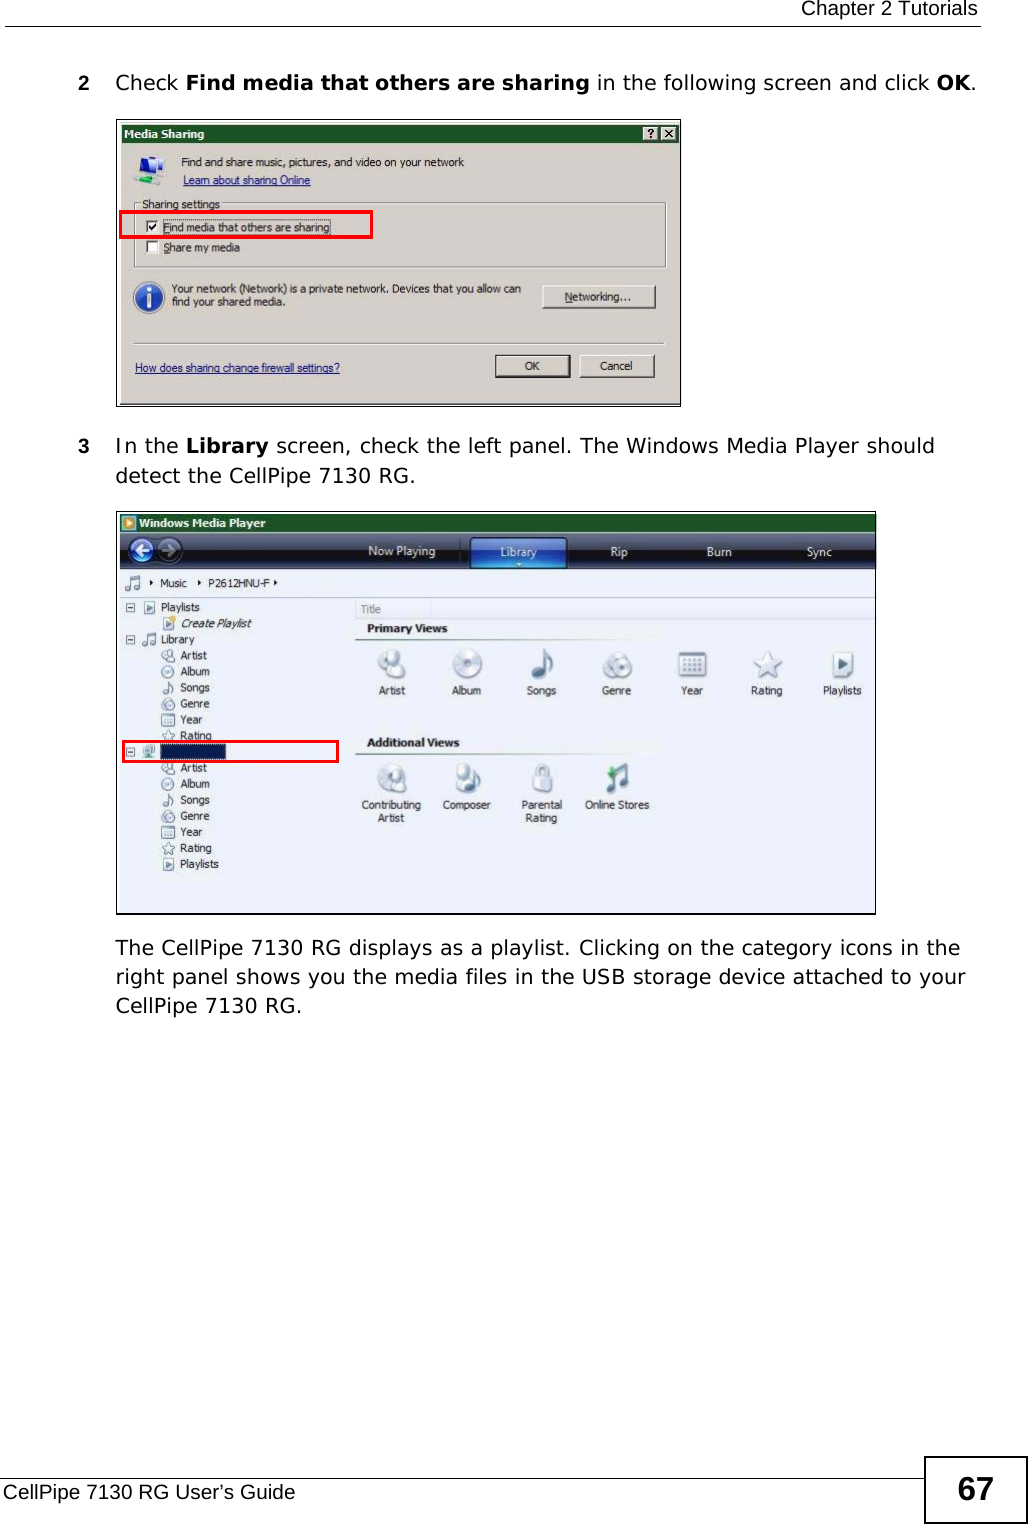  Chapter 2 TutorialsCellPipe 7130 RG User’s Guide 672Check Find media that others are sharing in the following screen and click OK.Tutorial: Media Sharing using Windows Vista (2)3In the Library screen, check the left panel. The Windows Media Player should detect the CellPipe 7130 RG. Tutorial: Media Sharing using Windows Vista (3) The CellPipe 7130 RG displays as a playlist. Clicking on the category icons in the right panel shows you the media files in the USB storage device attached to your CellPipe 7130 RG.  